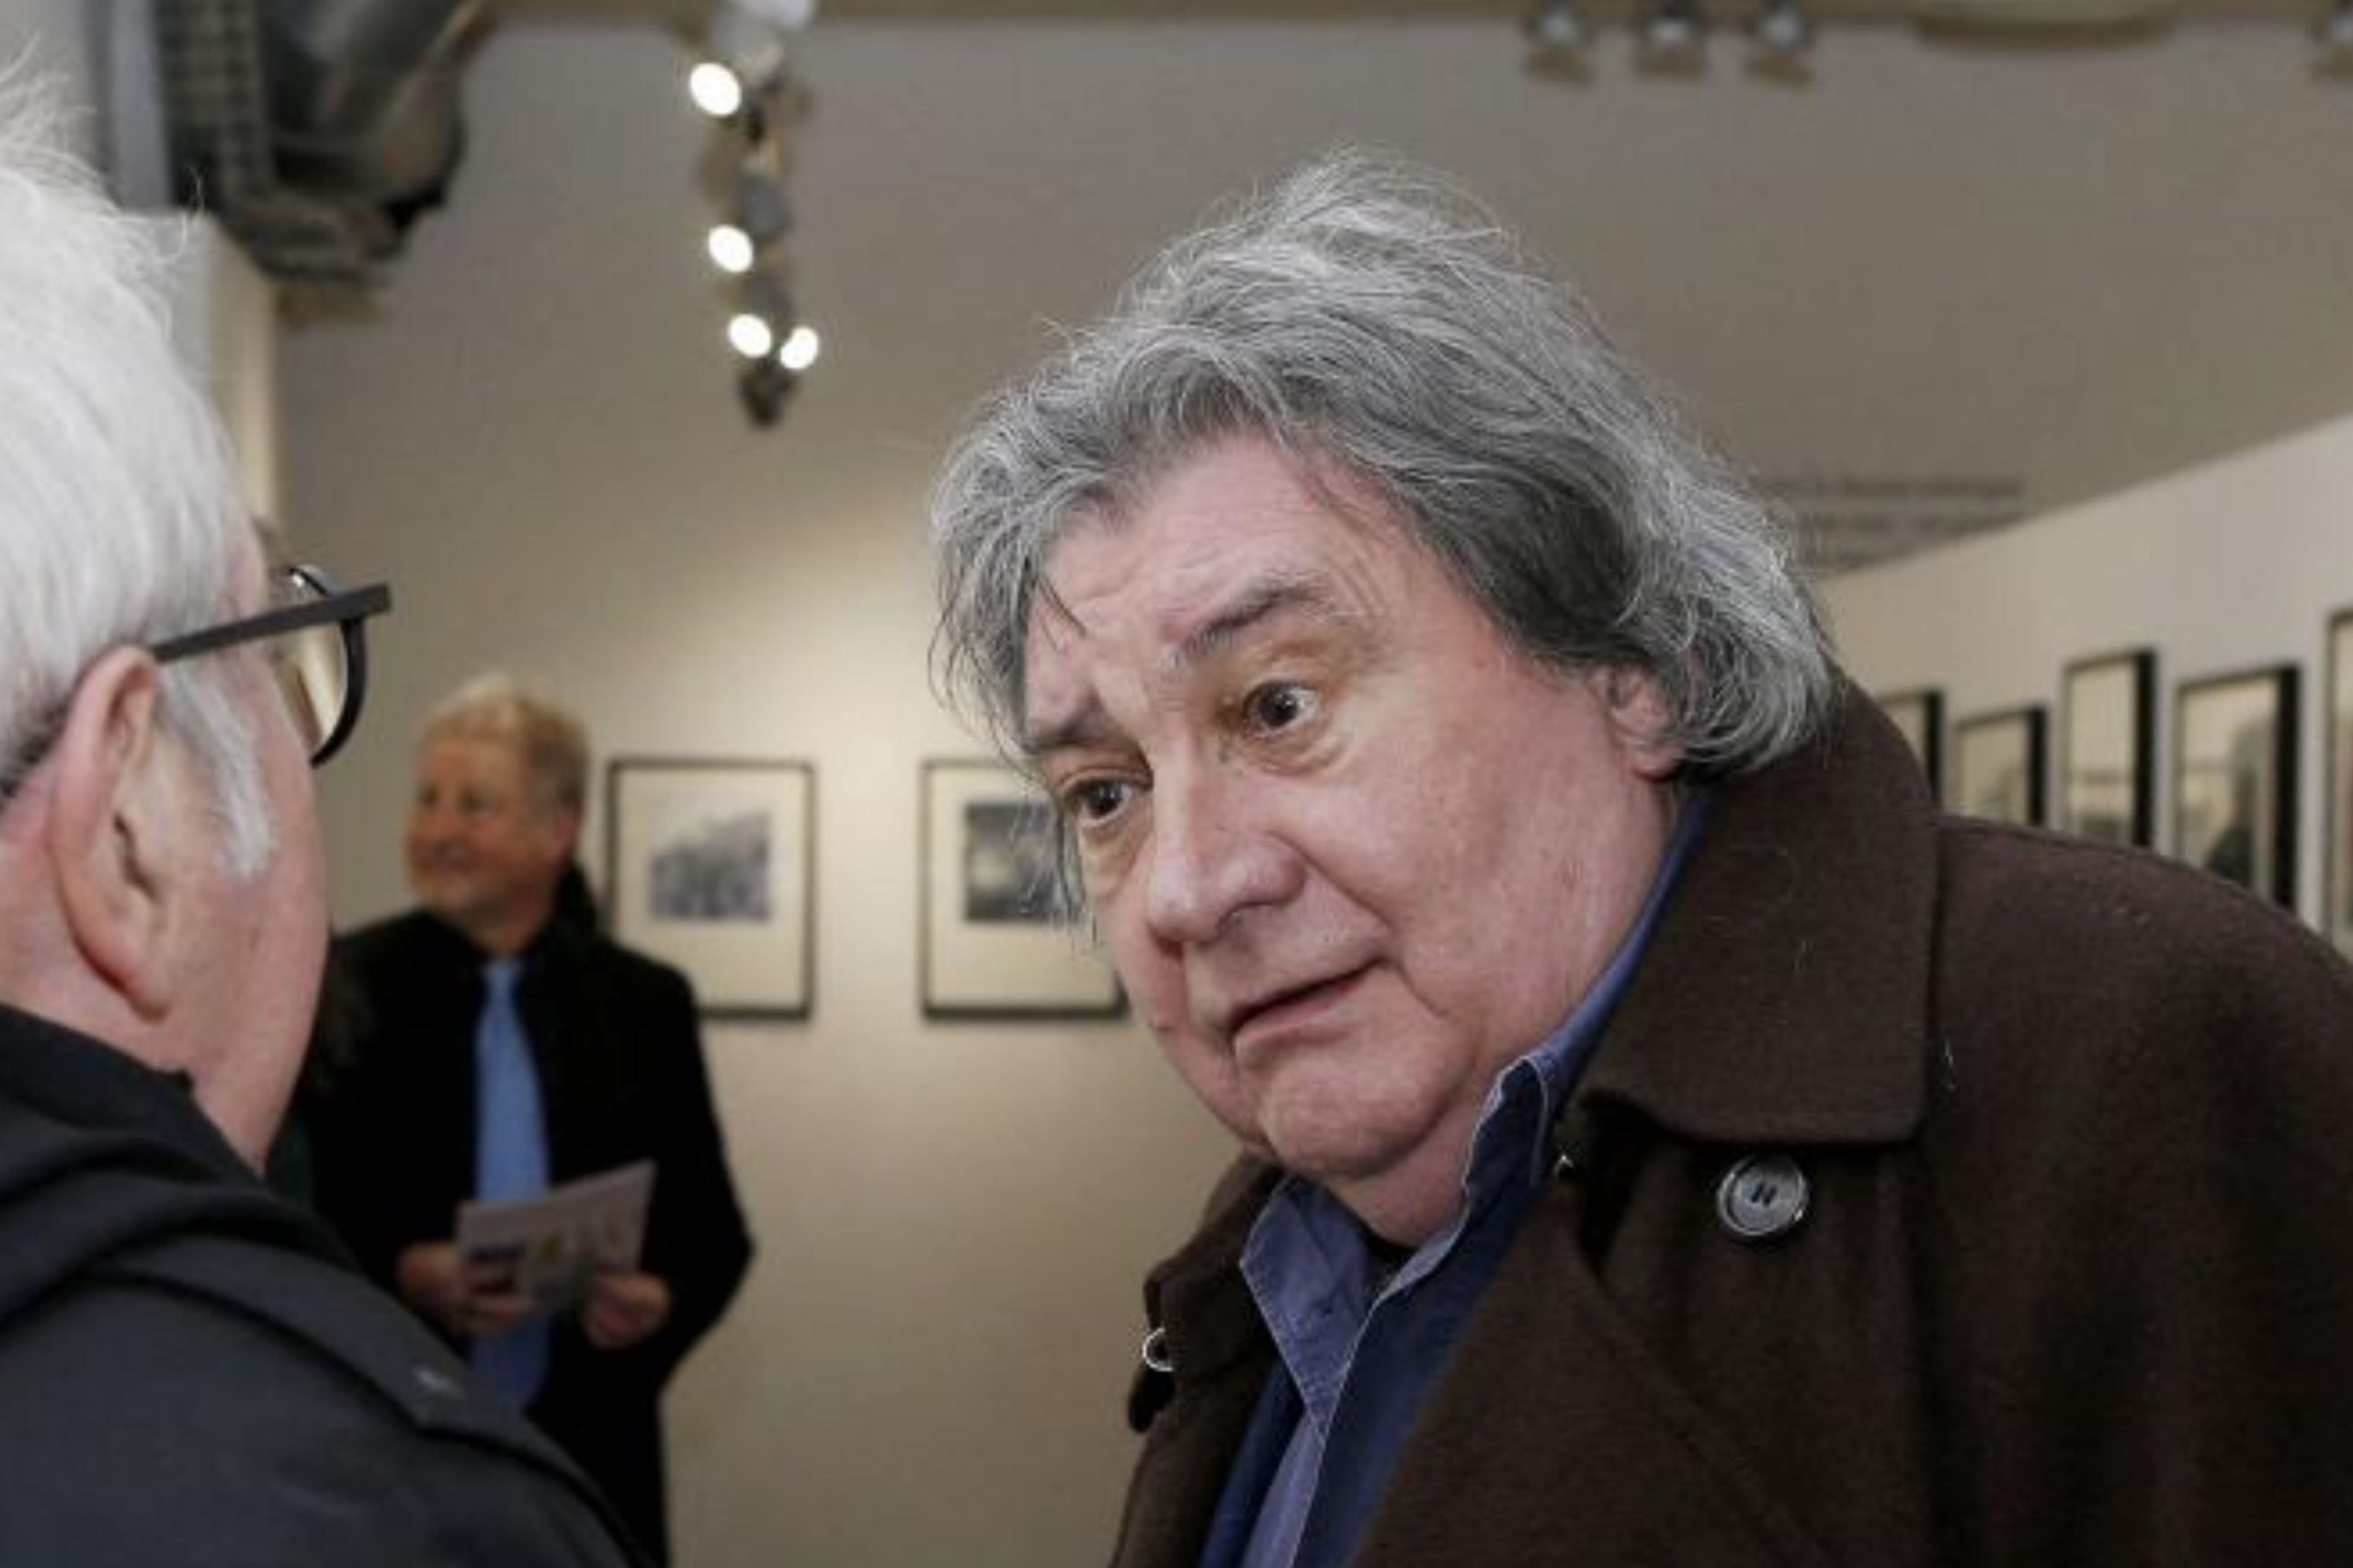 Alain Dorval, the iconic French voice of Sylvester Stallone, has died aged 77., Magnate Daily